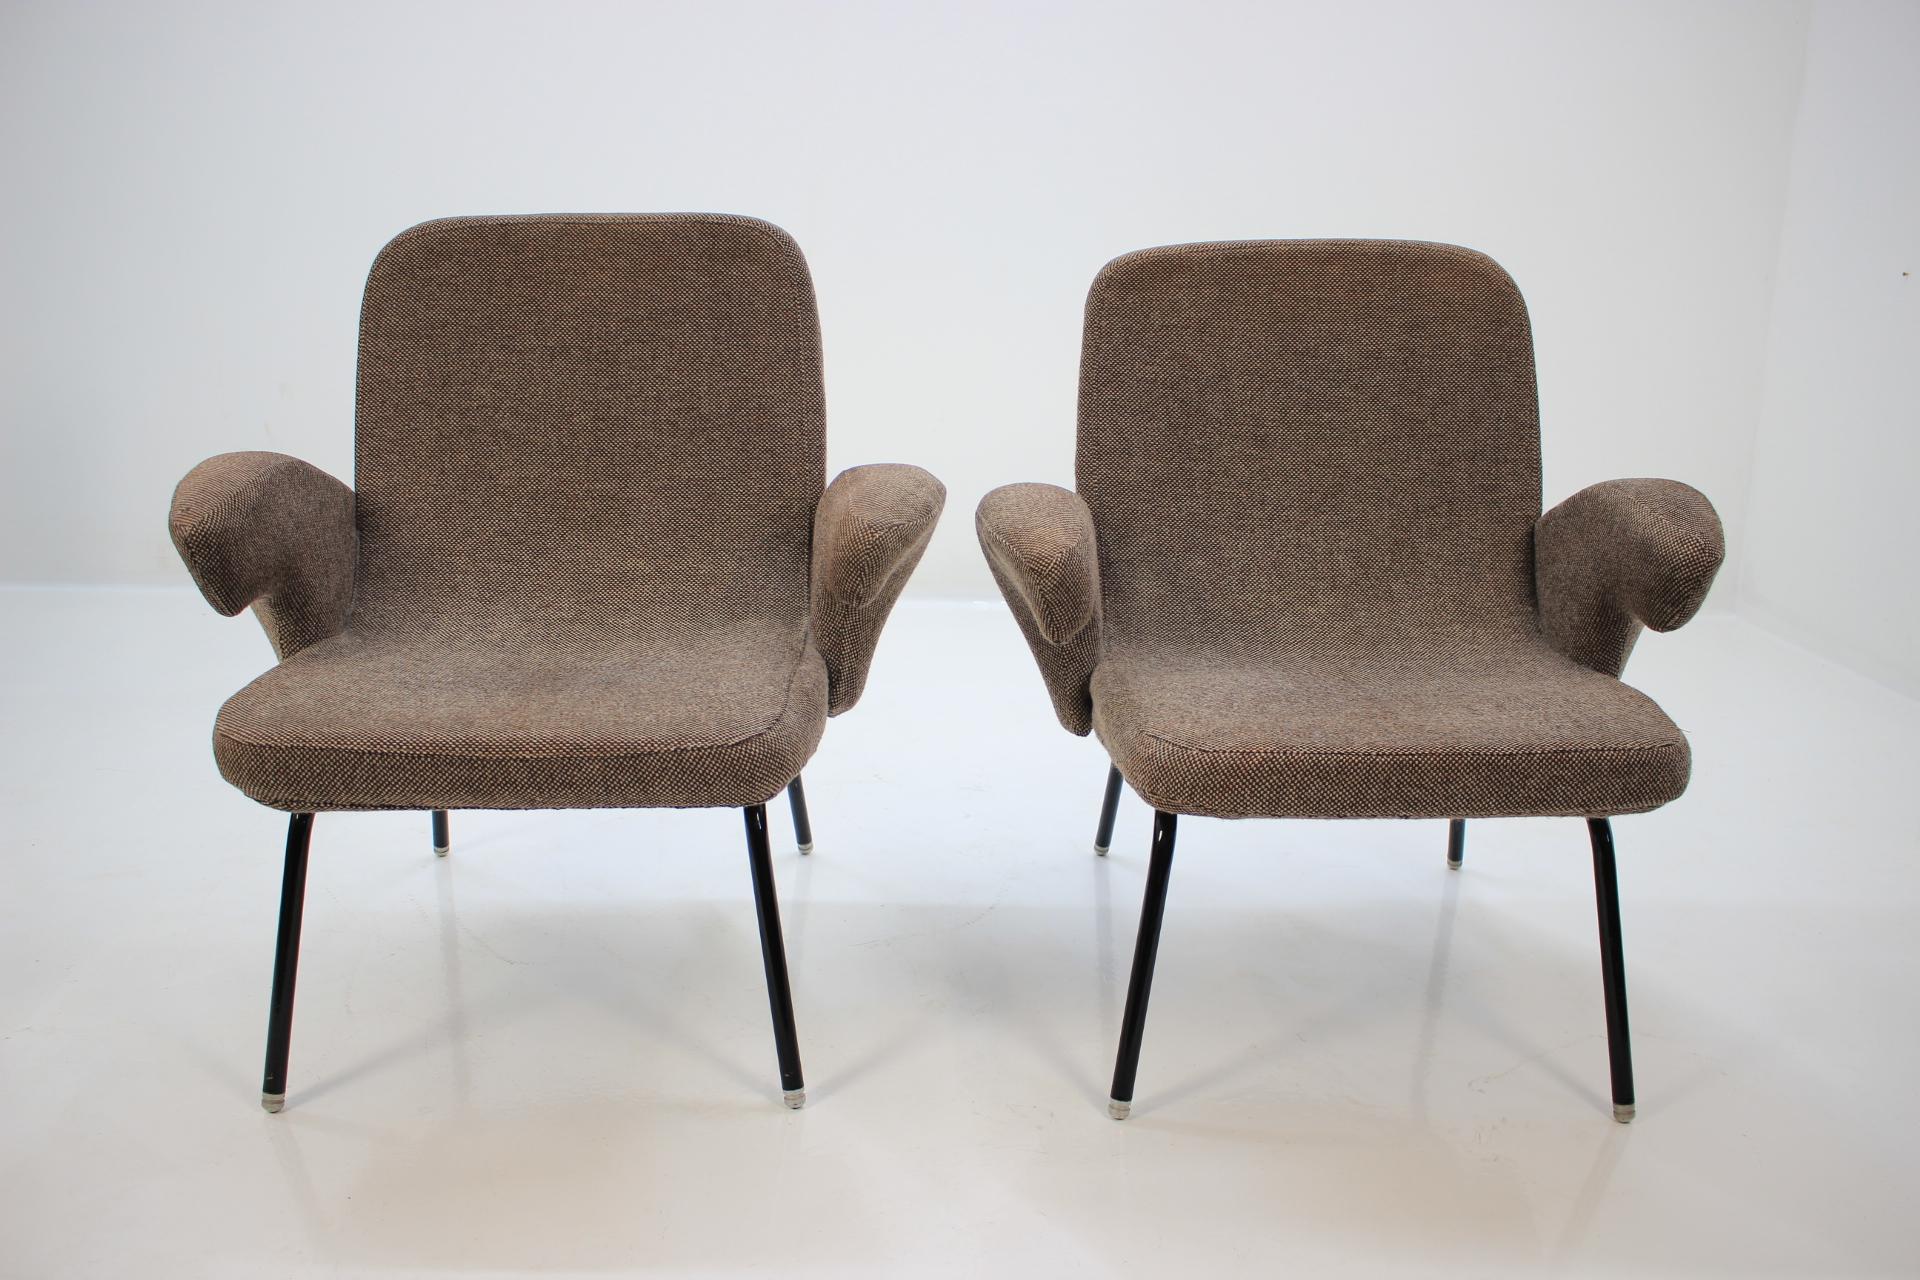 Czech Armchairs and Chairs by Alan Fuchs, 1961